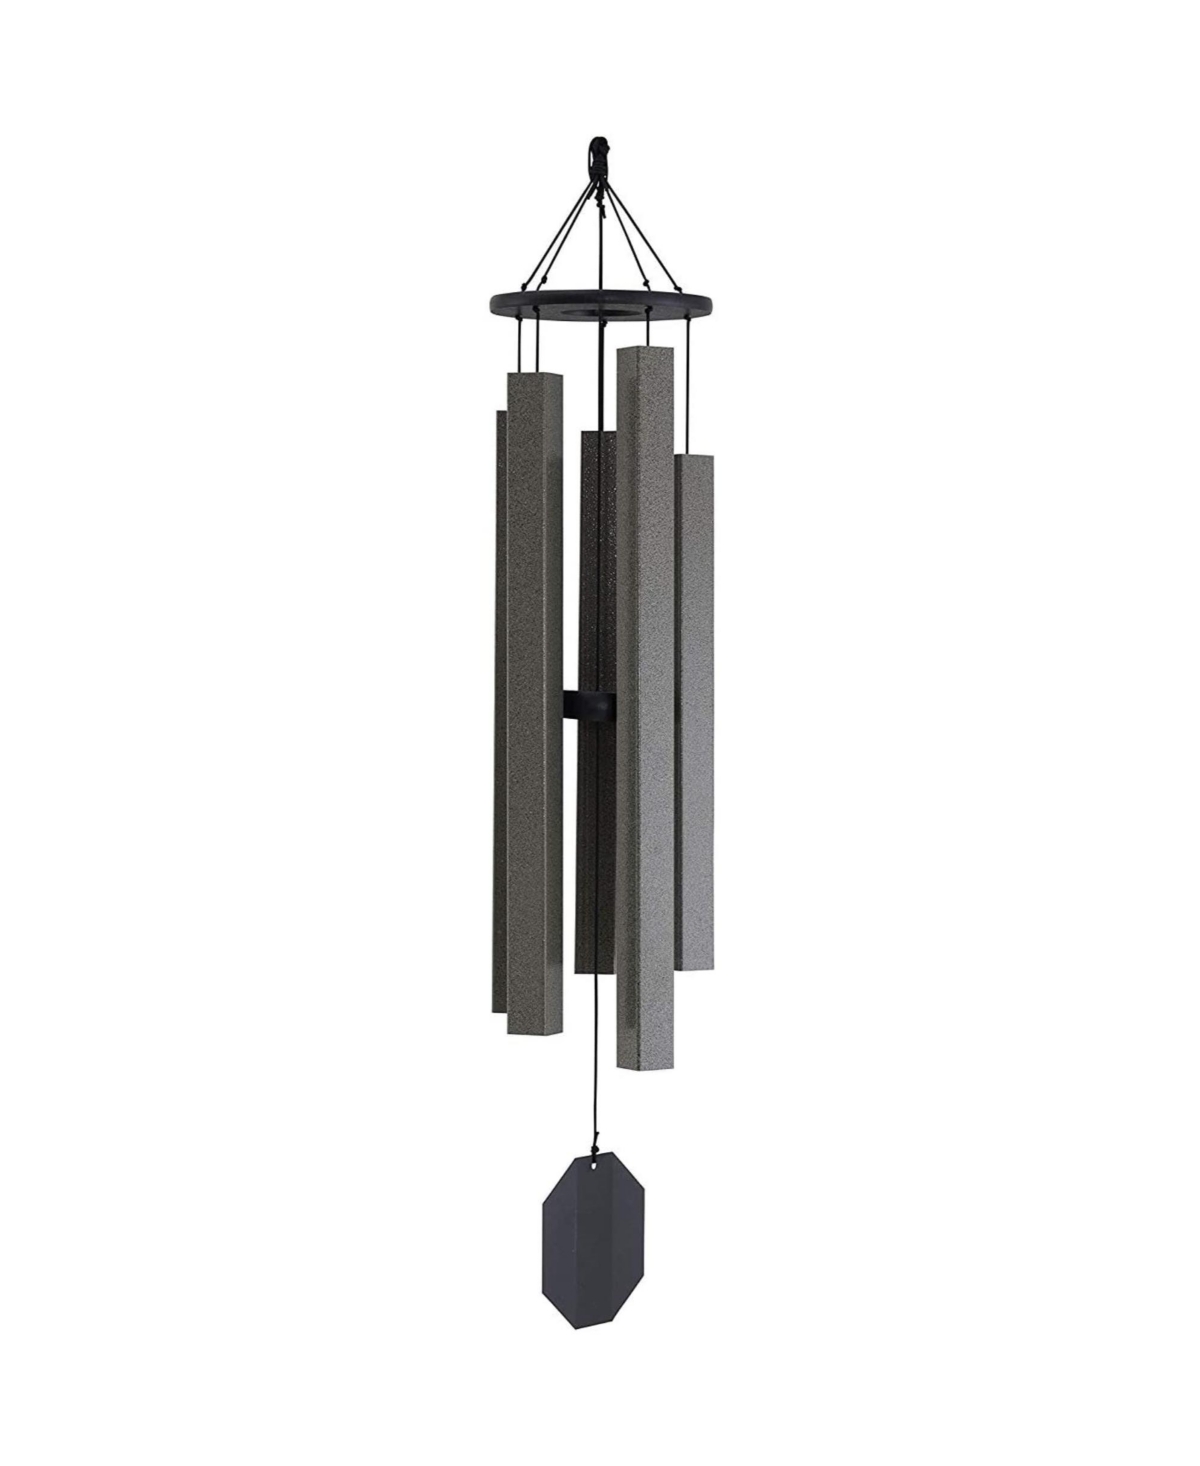 Alpine Whisper Wind Chime Amish Crafted, Mocha, 43in - Multi